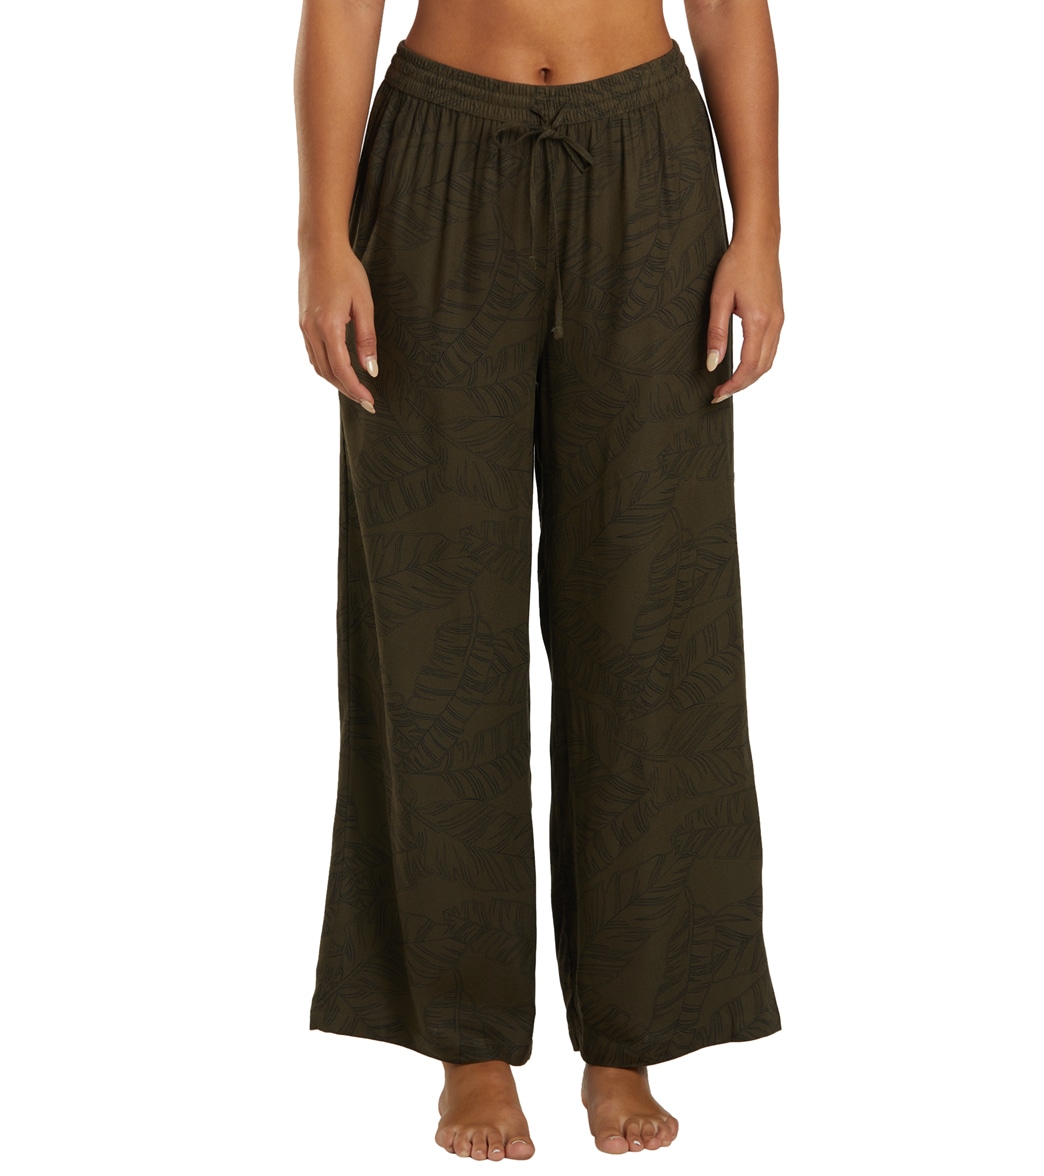 Hurley Women's Harley Wide Leg Pants - Olive Night Fro Large - Swimoutlet.com